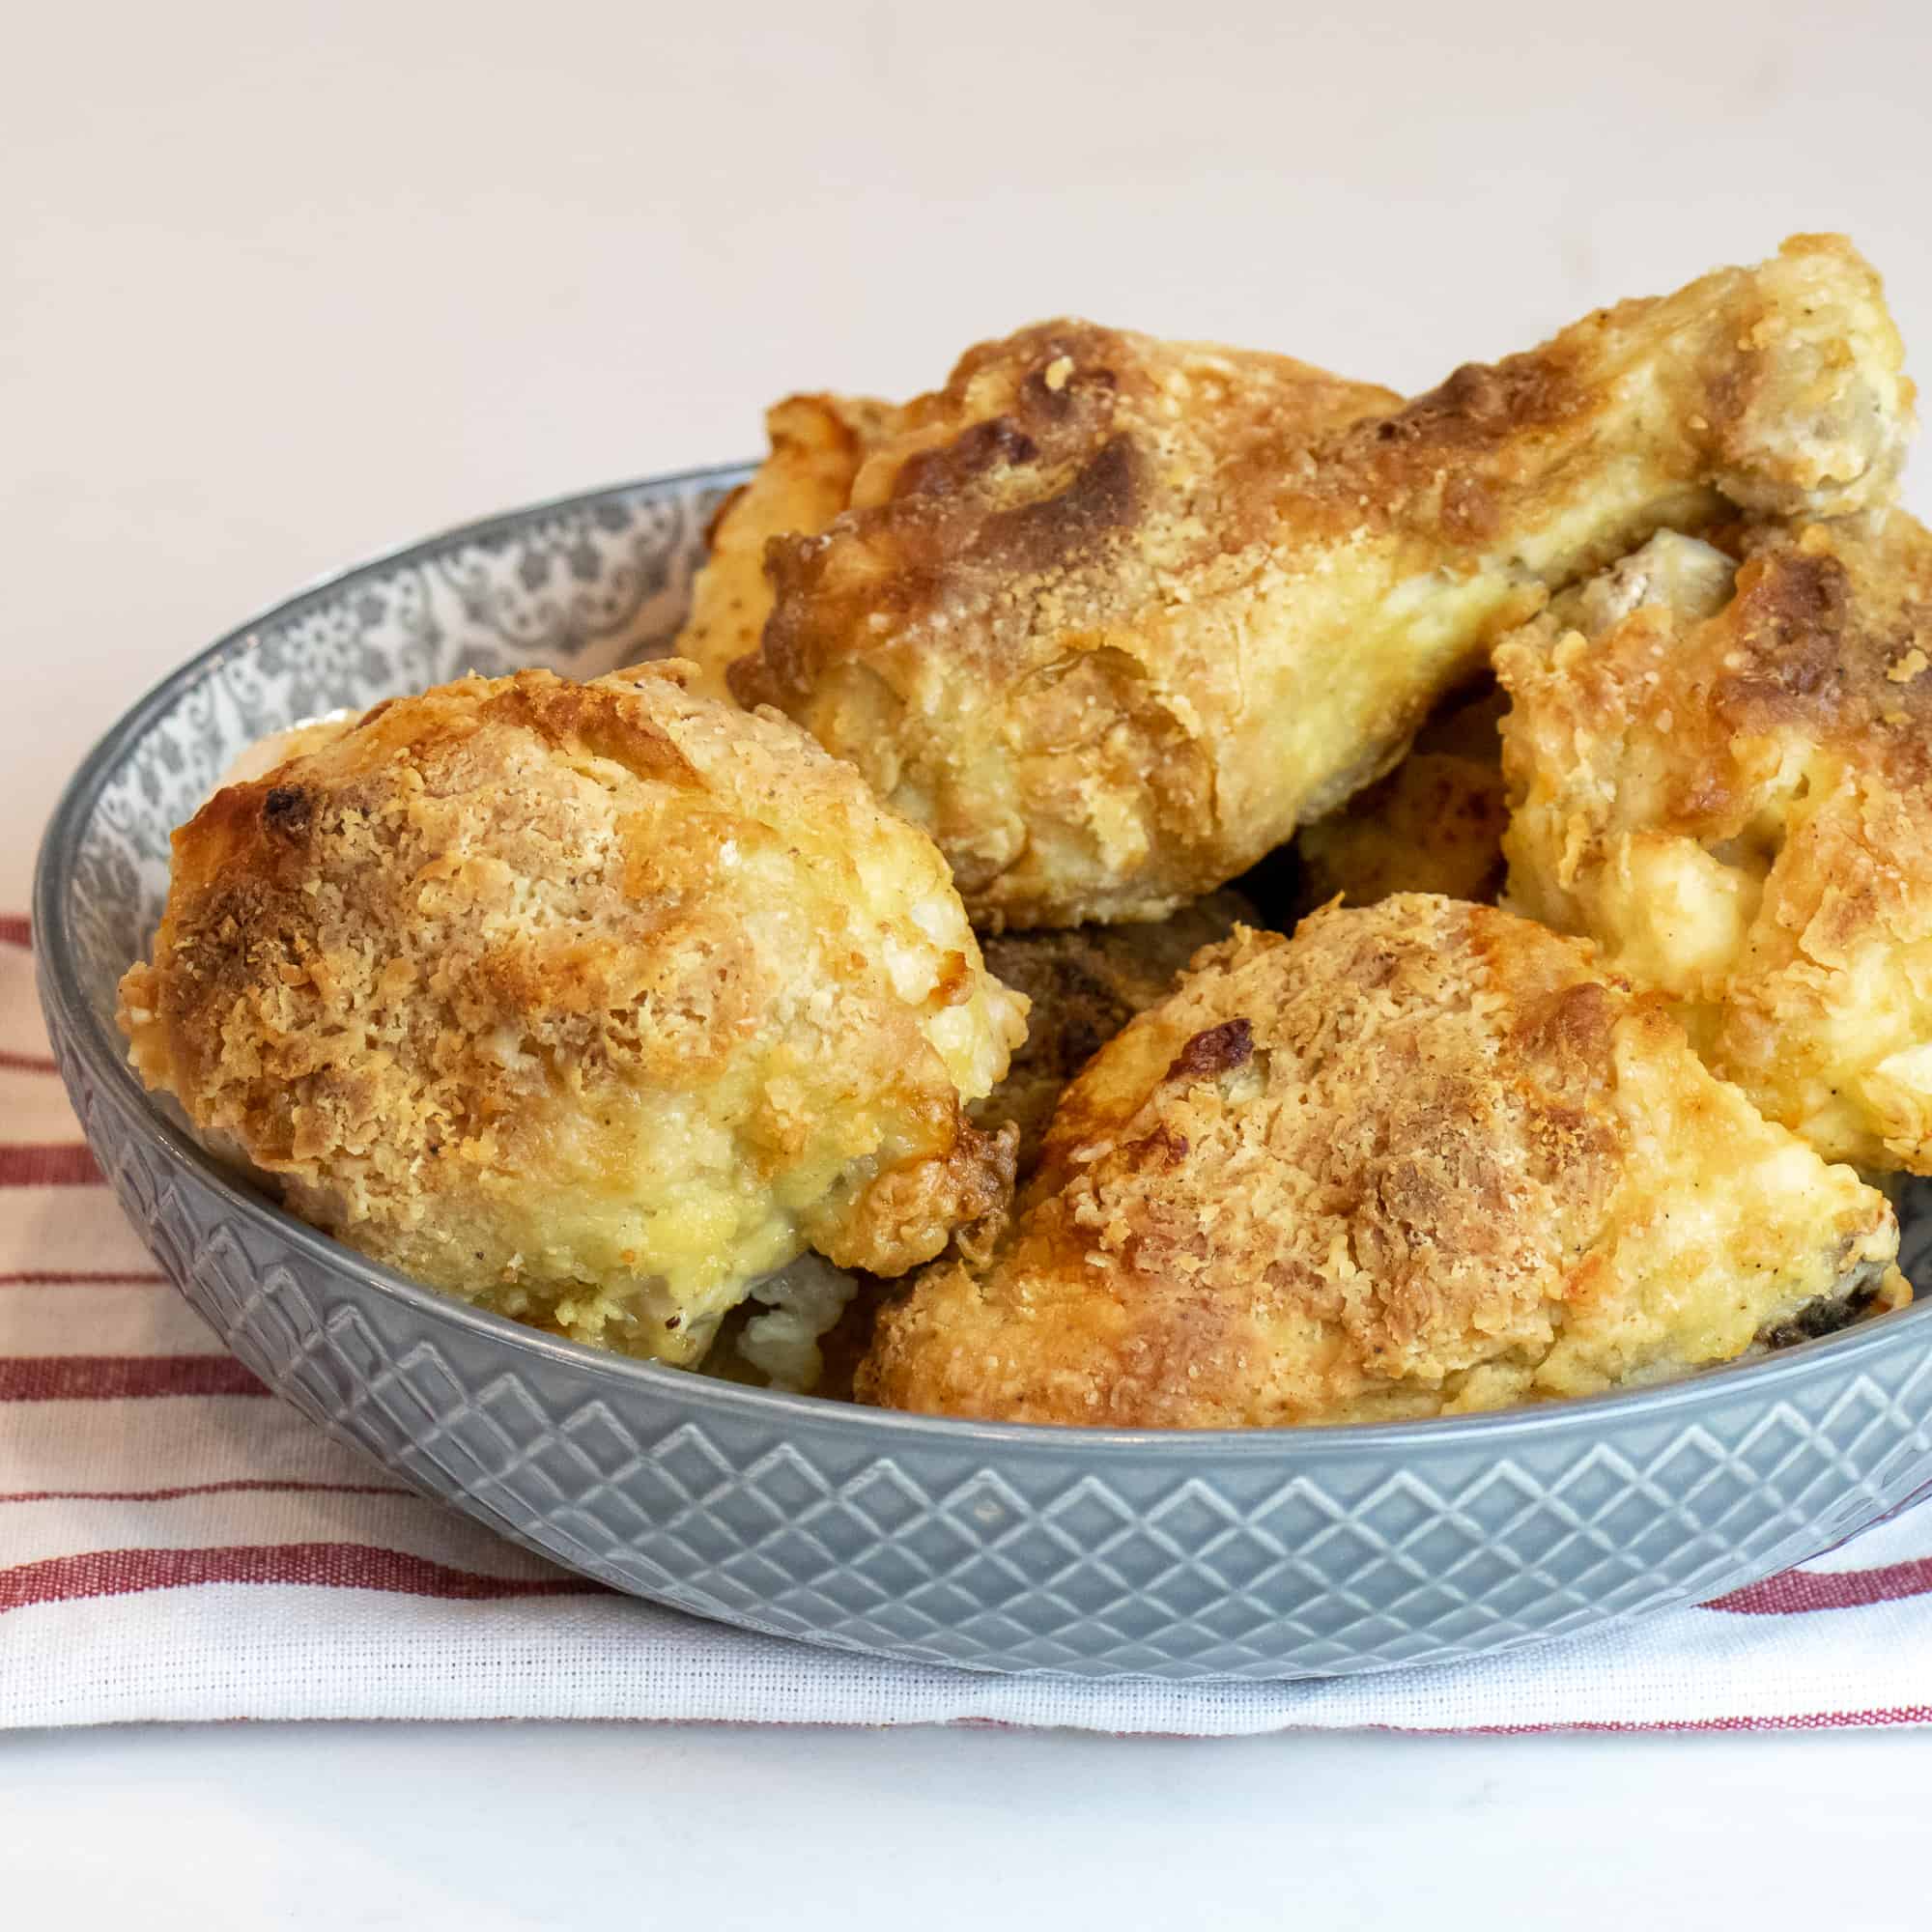 Instructions for how to make fried chicken in an air fryer. Works with toaster oven and other types of air fryer units like Phillips and Instant Pot.